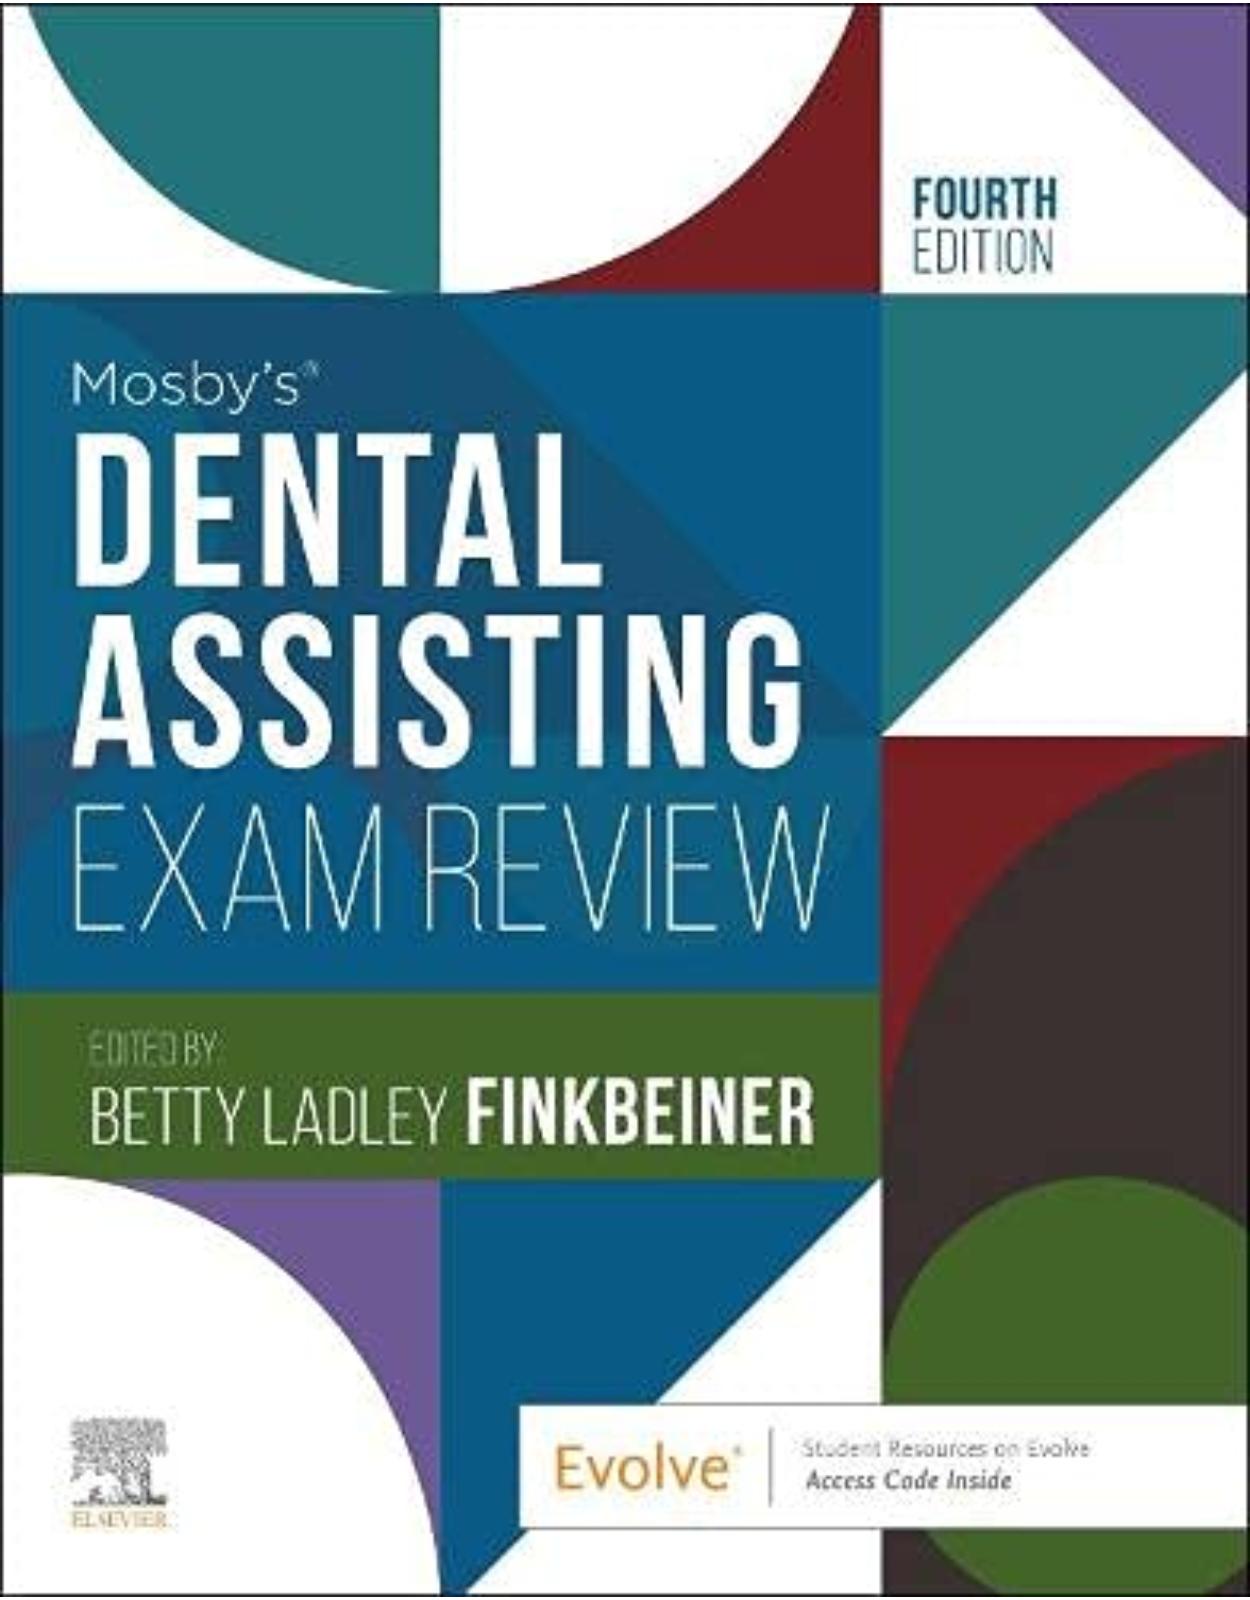 Mosby’s Dental Assisting Exam Review